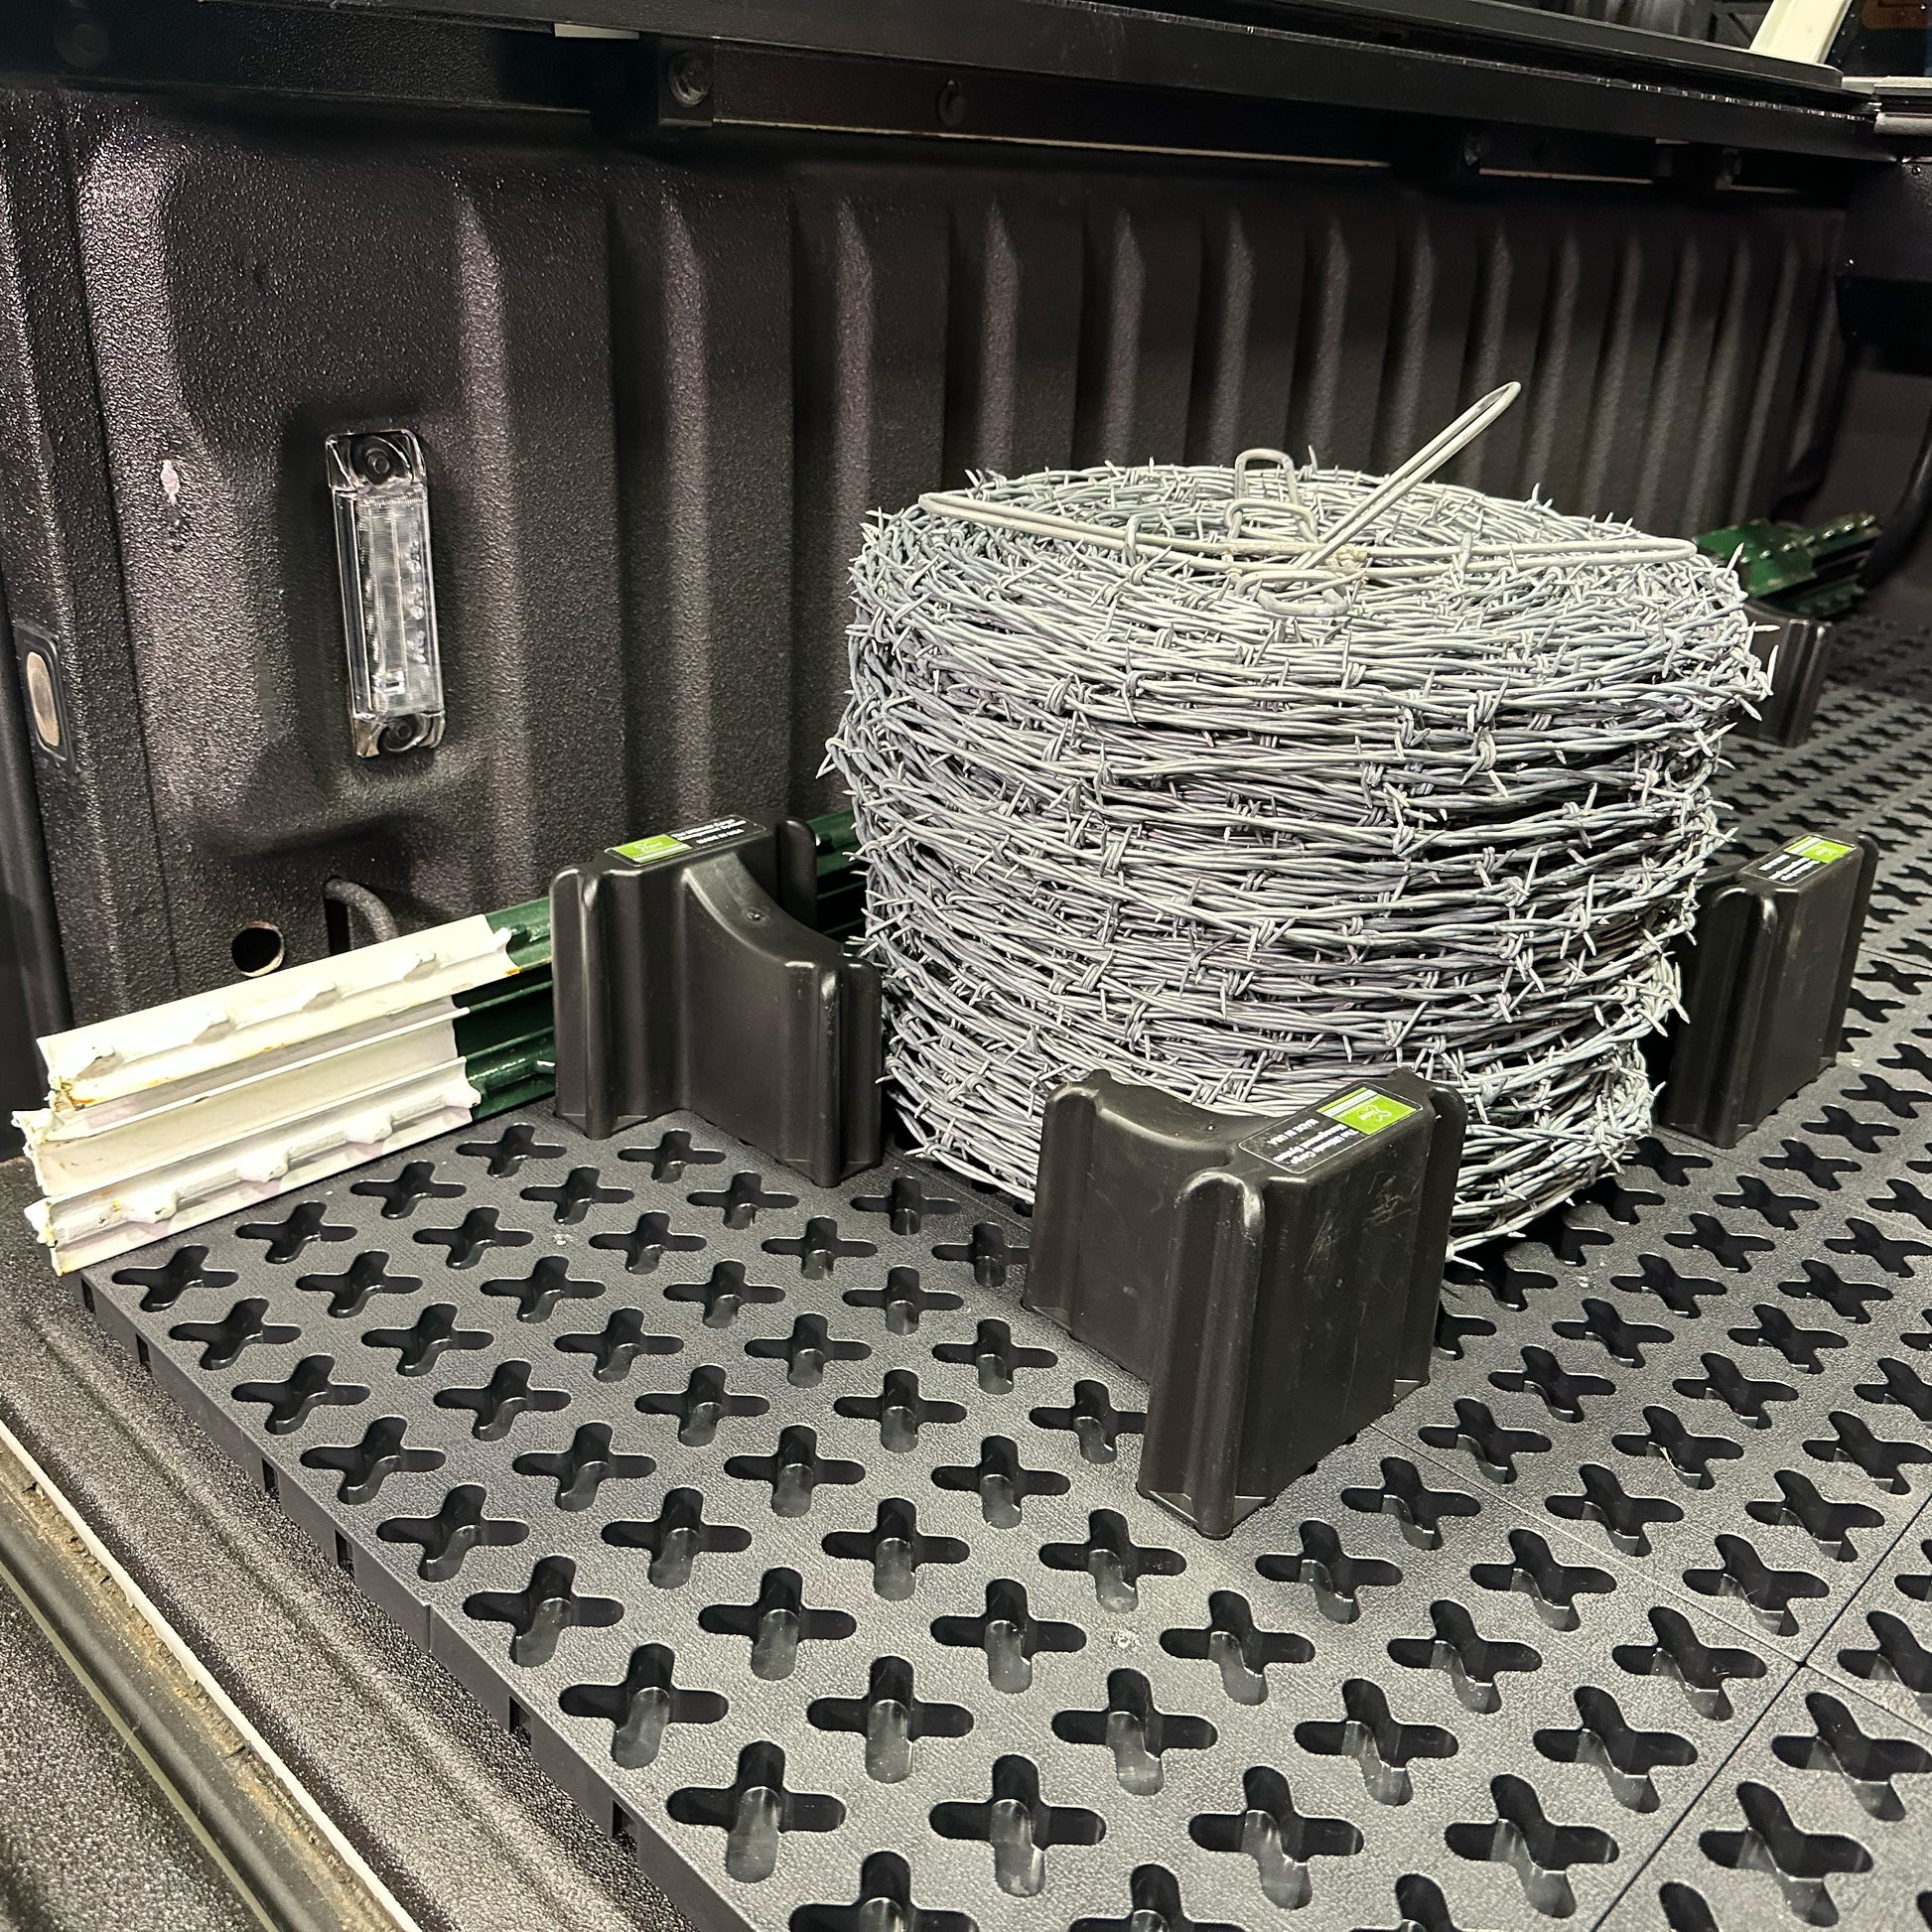 A spool of barbed wire and t-posts secured in a truck bed.